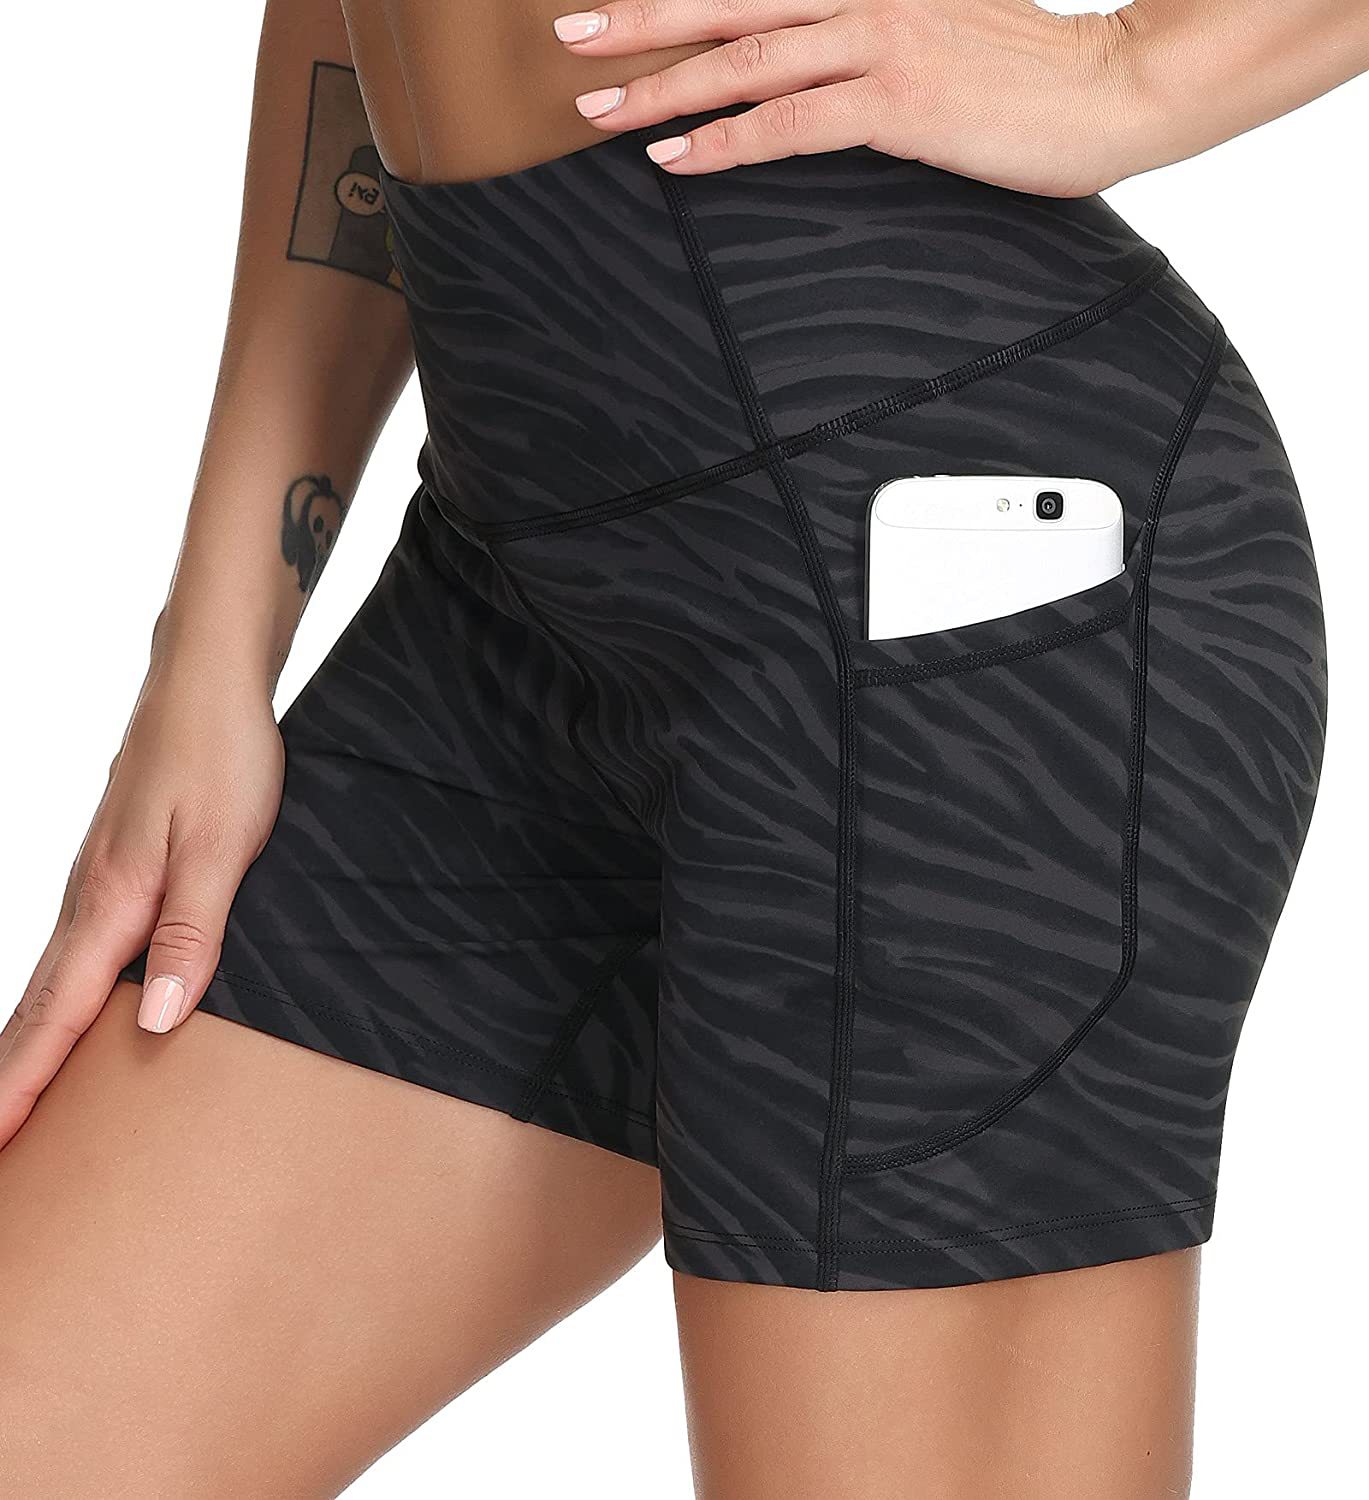 High Waist Yoga Shorts for Women with 2 Side Pockets Tummy Control Running  Home Workout Shorts